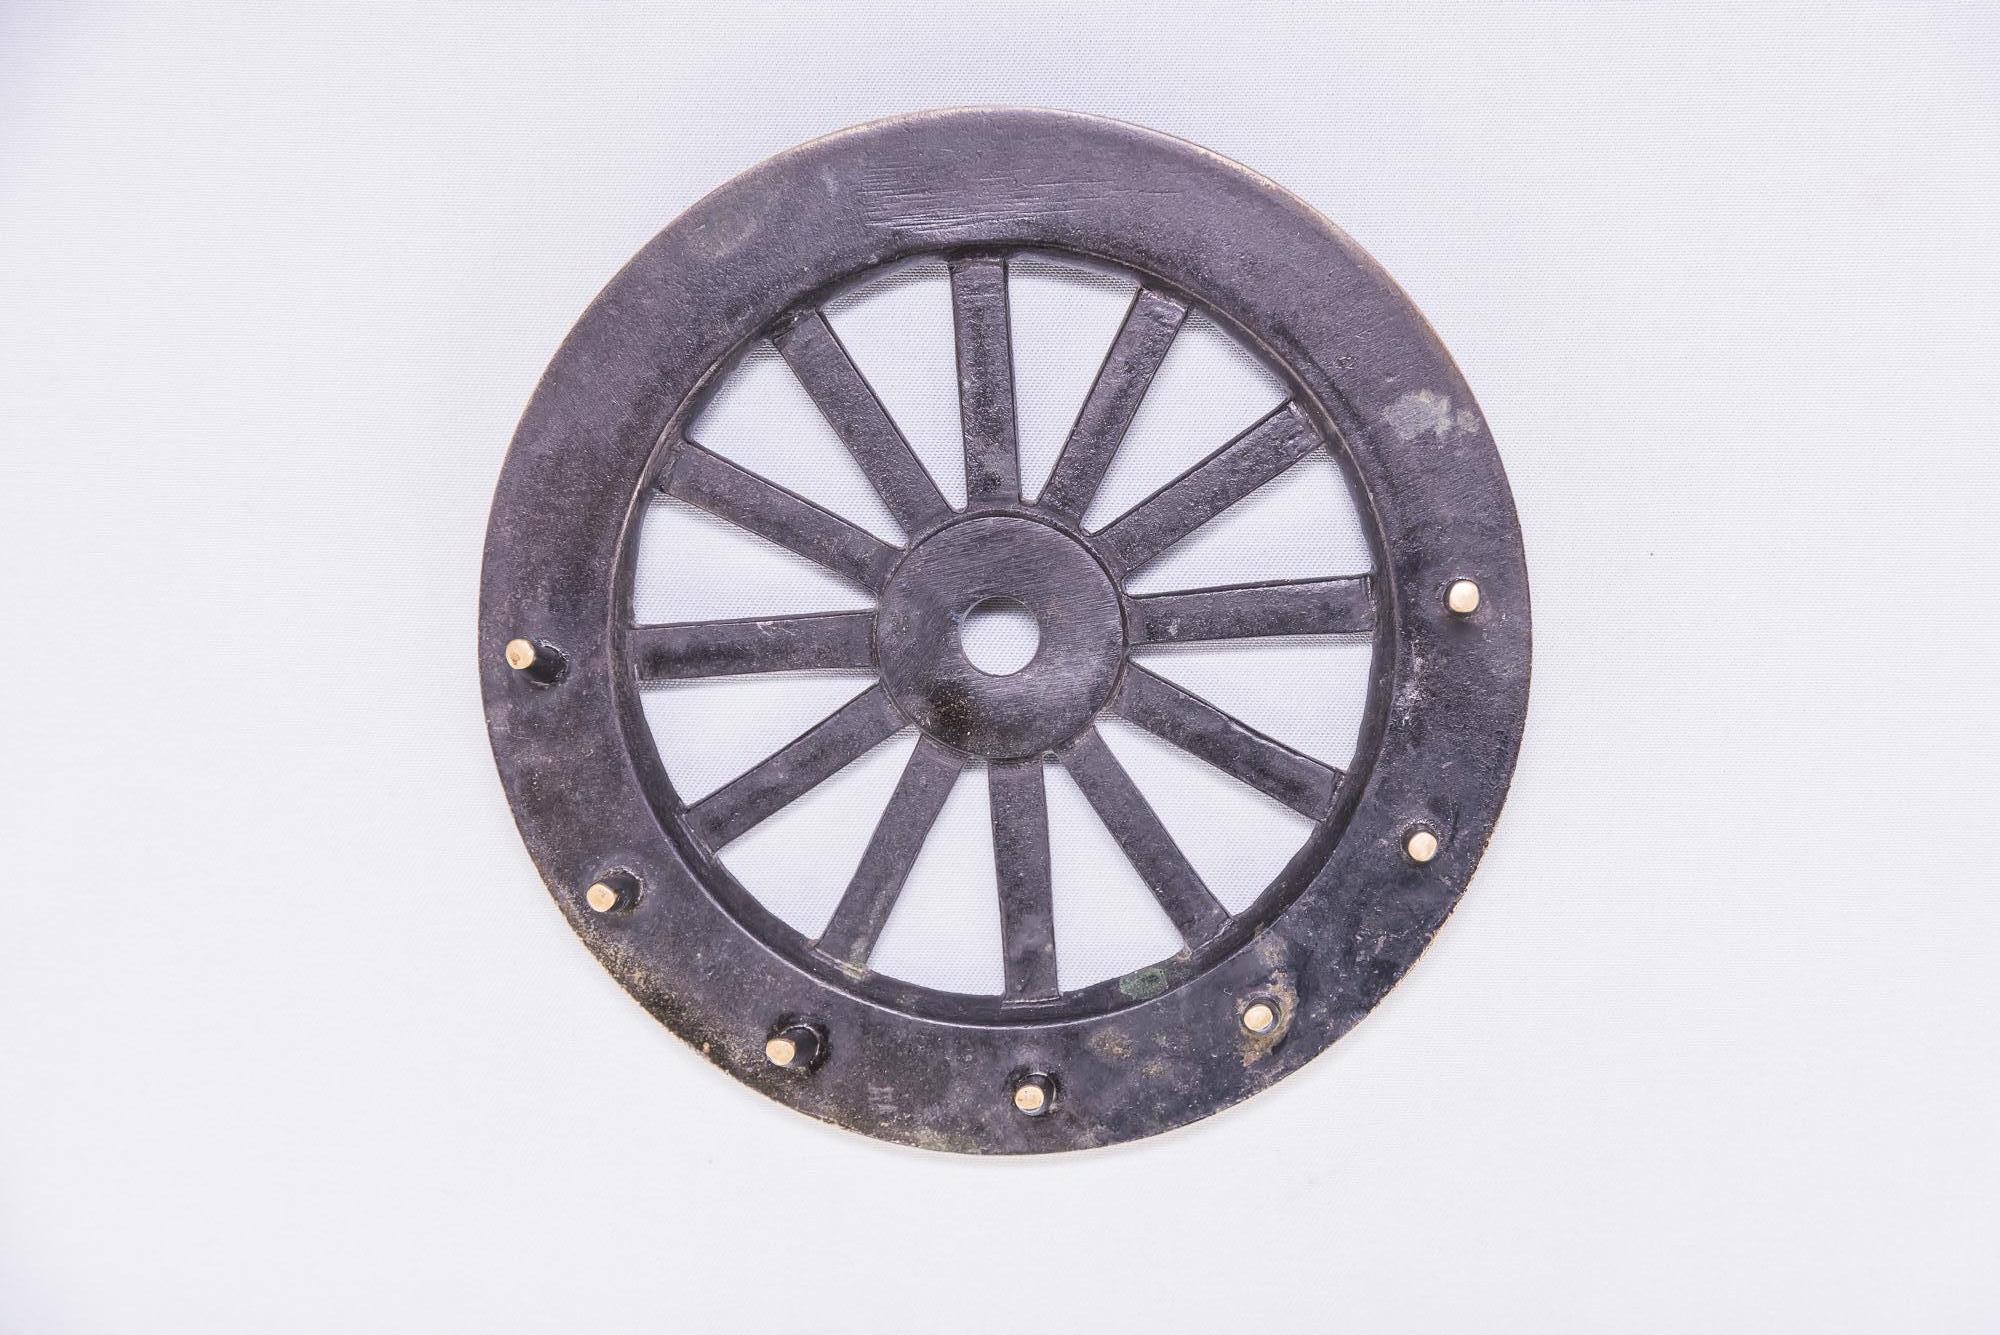 Key holder in a style of a wheel by Walter Bosse circa 1950s
Original condition.